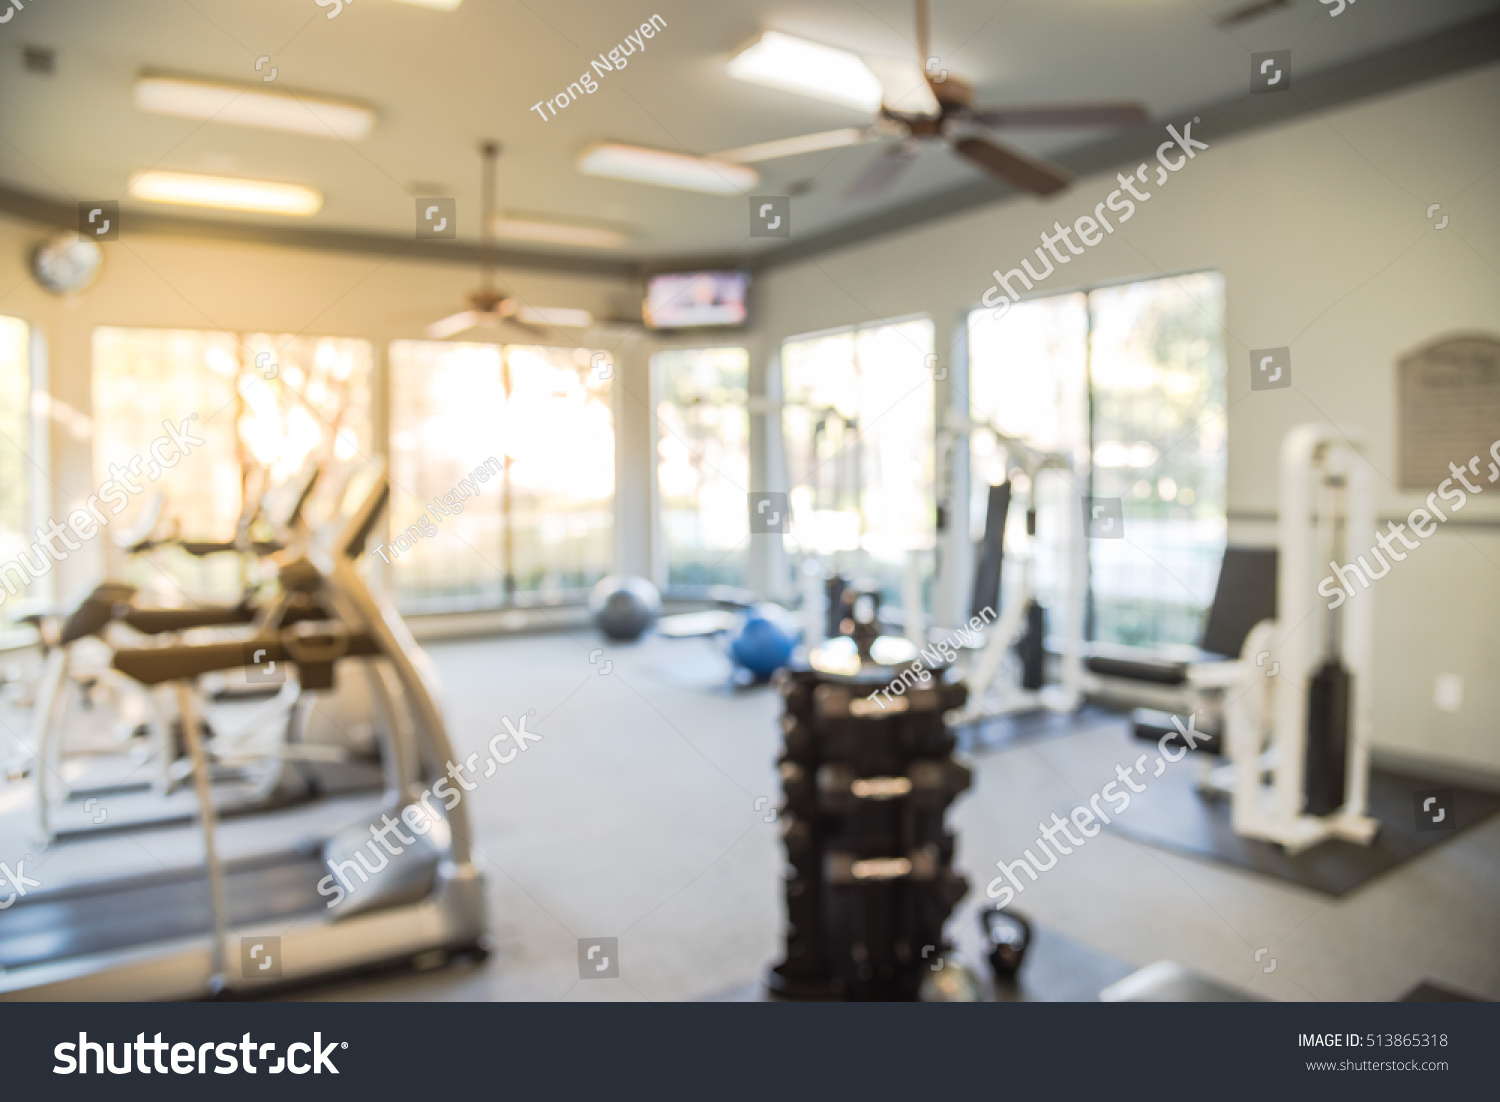 Blurred Image Fitness Center Cardio Machines Stock Photo Edit Now